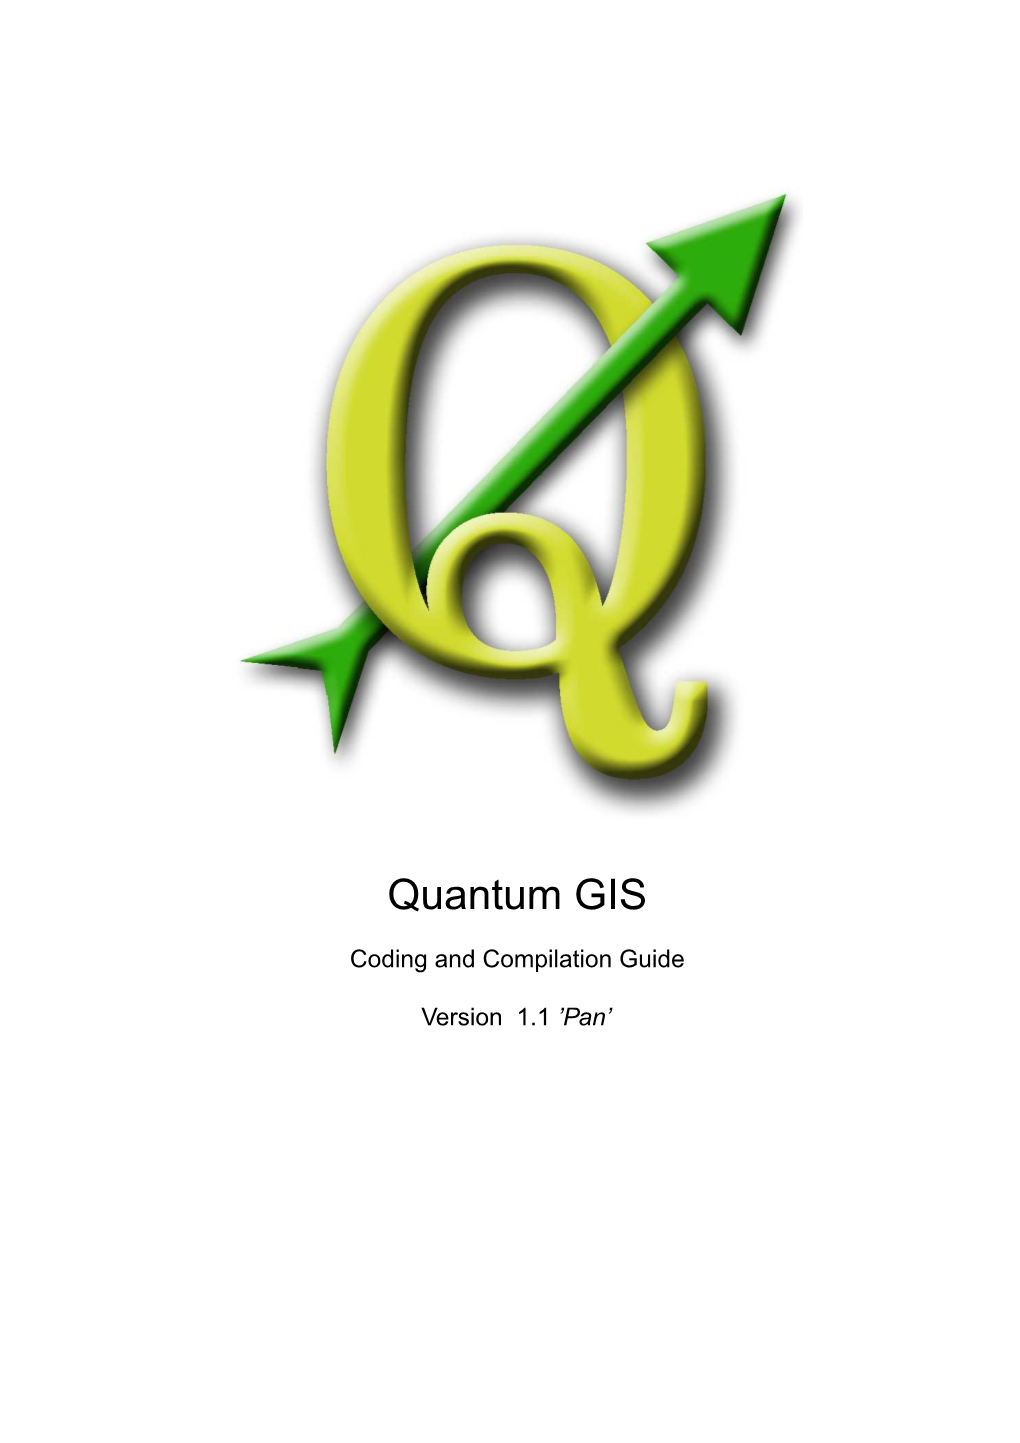 QGIS Coding and Compilation Guide